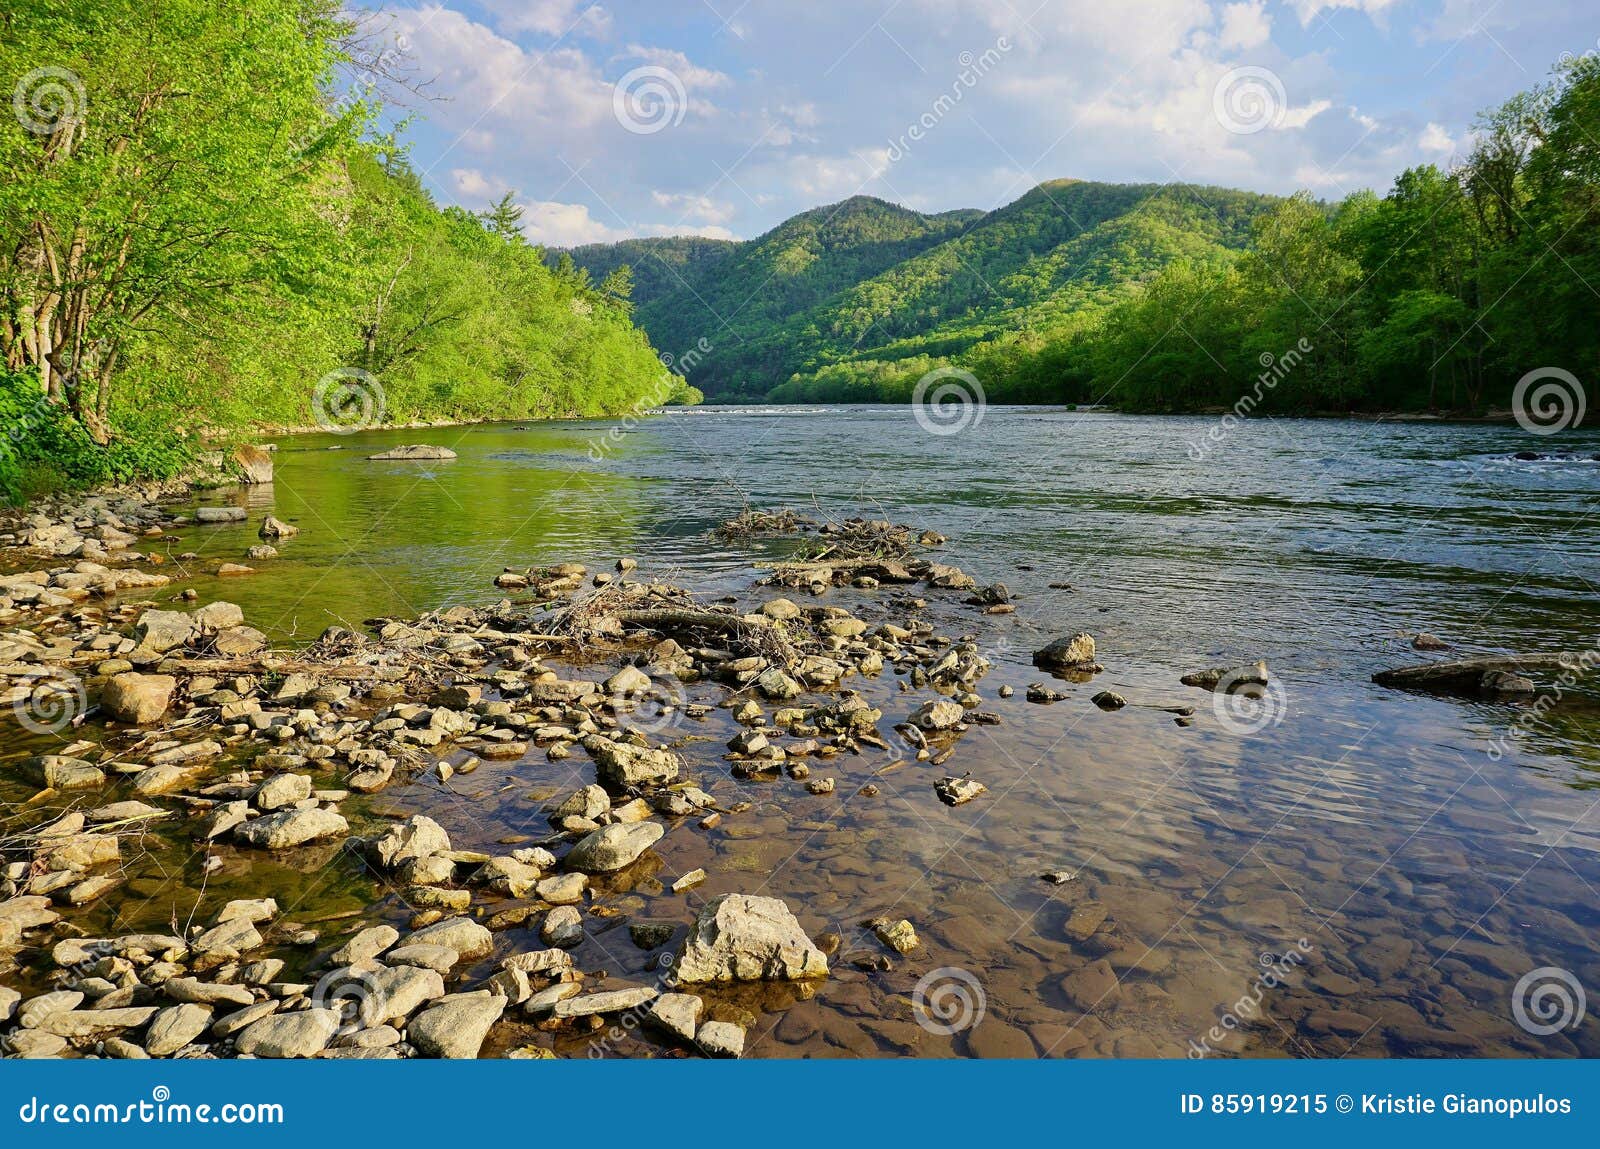 french broad river in appalachian mountains near hot springs north carolina